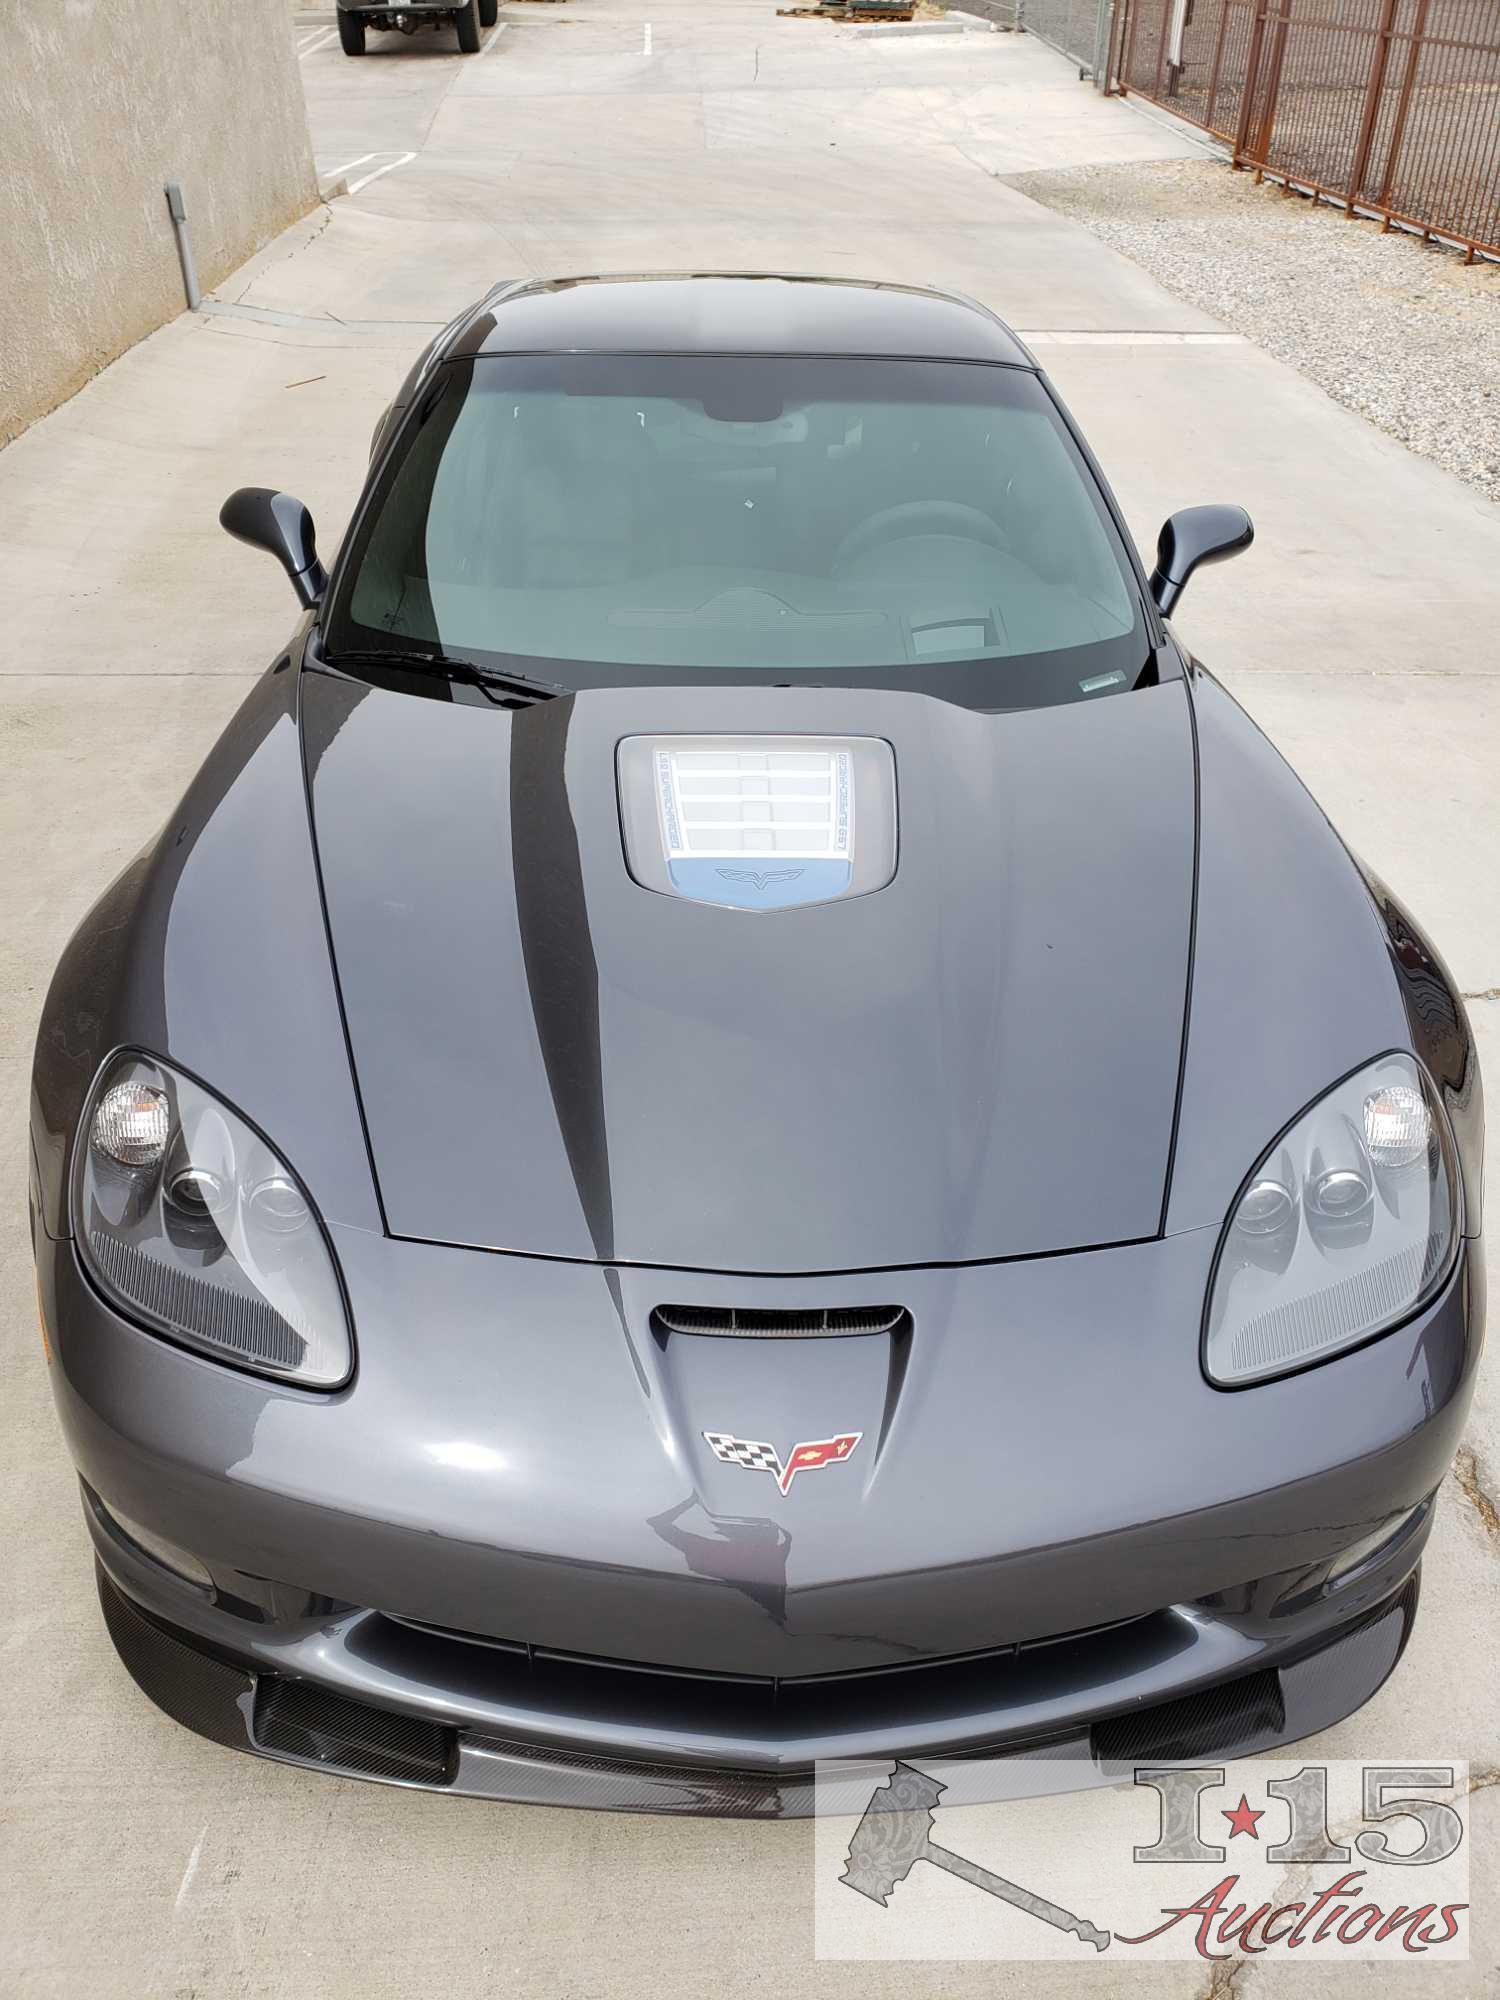 2011 Corvette ZR1, Under 6k Miles! See Video! Sold on Non-op!